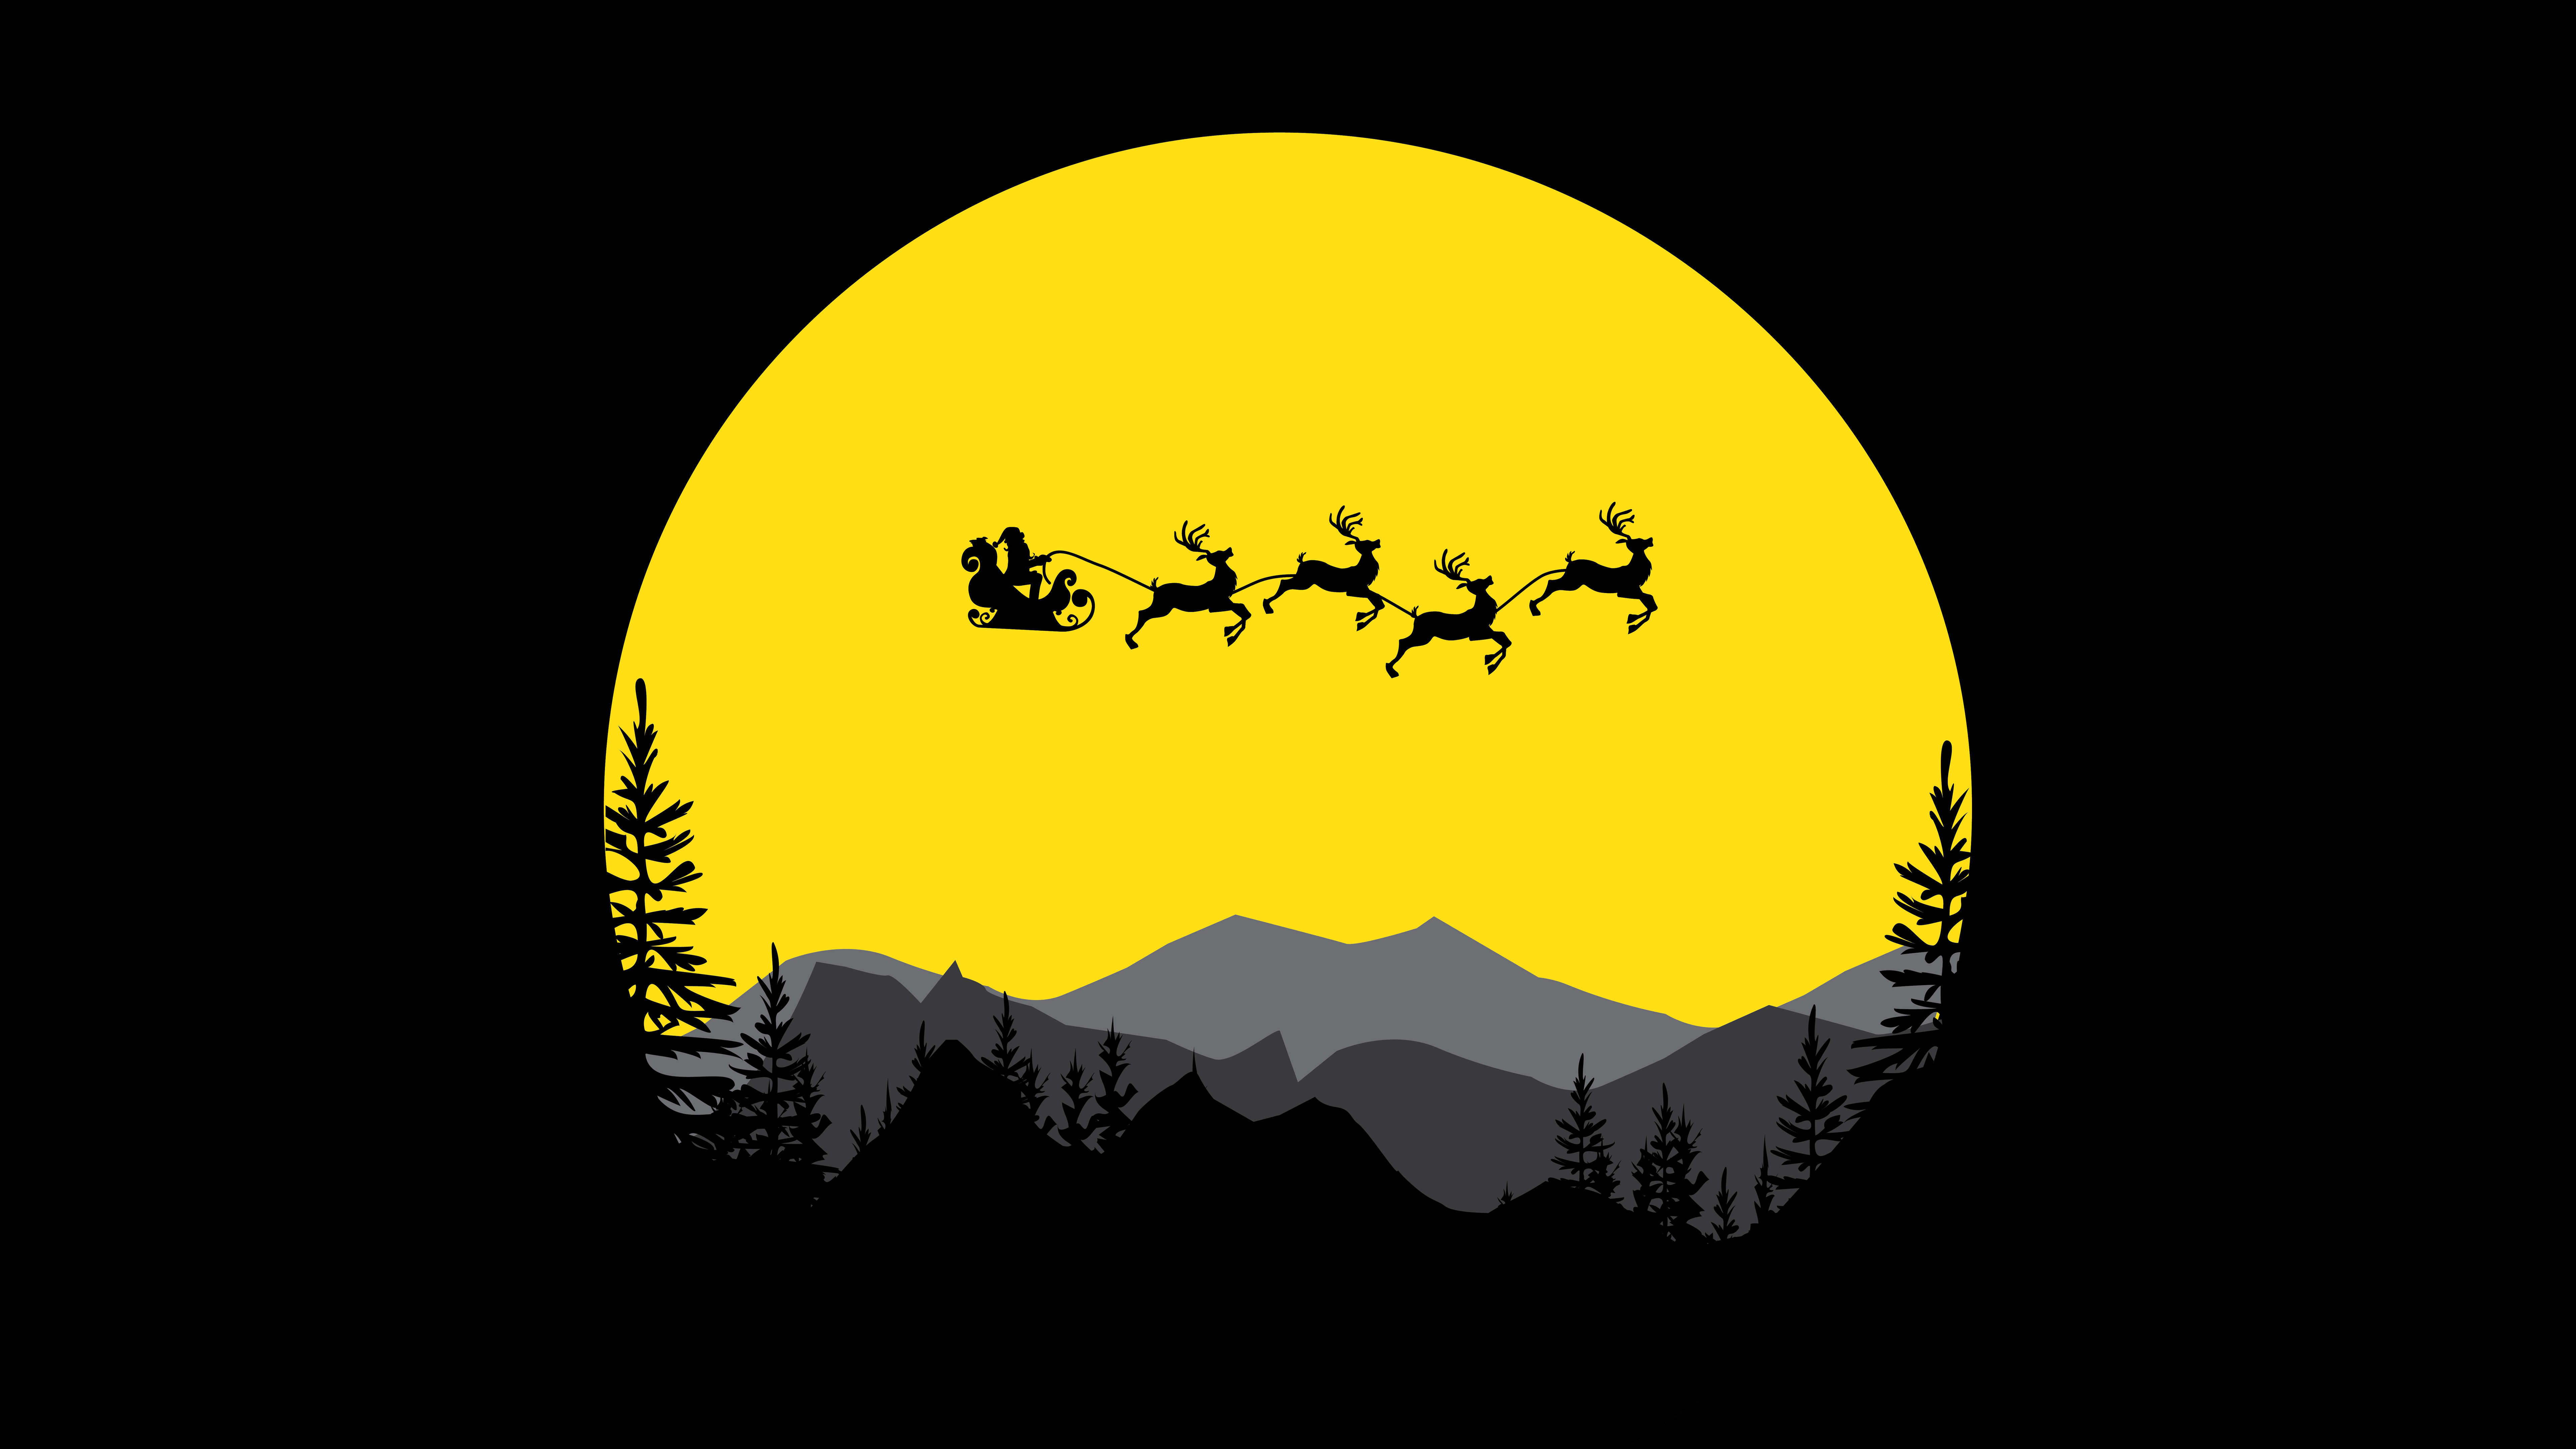 Wallpaper minimalism Santa the dark background sitting at the Christmas  tree images for desktop section новый год  download